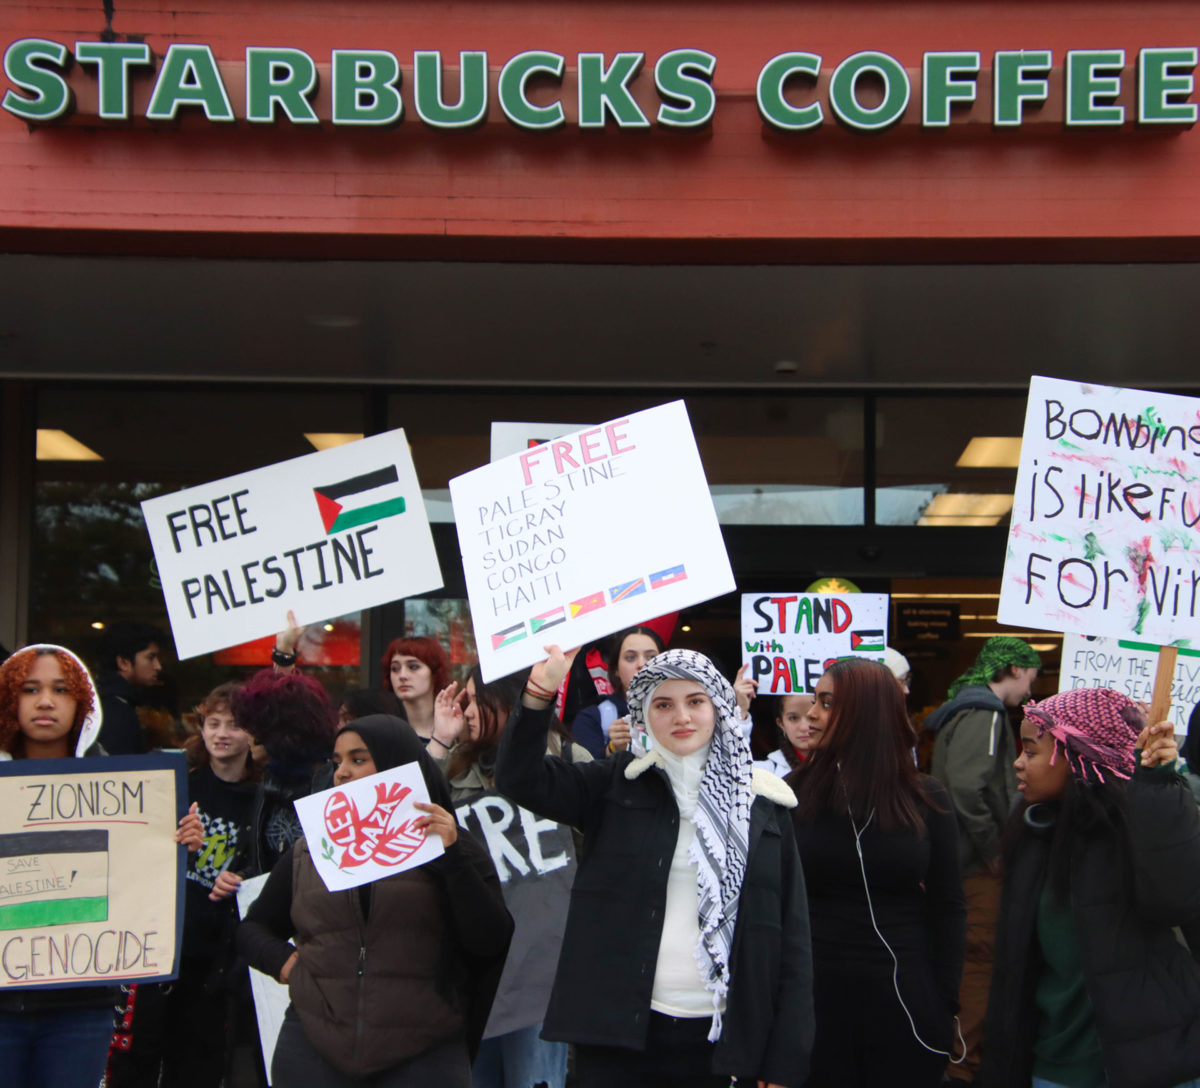 Terrace senior Sarah Al-Maiahi holds up a sign, which states “Free Palestine, Tigray, Sudan, Congo, and Haiti” while she and the rest of the student protesters stand outside the front of Starbucks in Cedar Plaza.